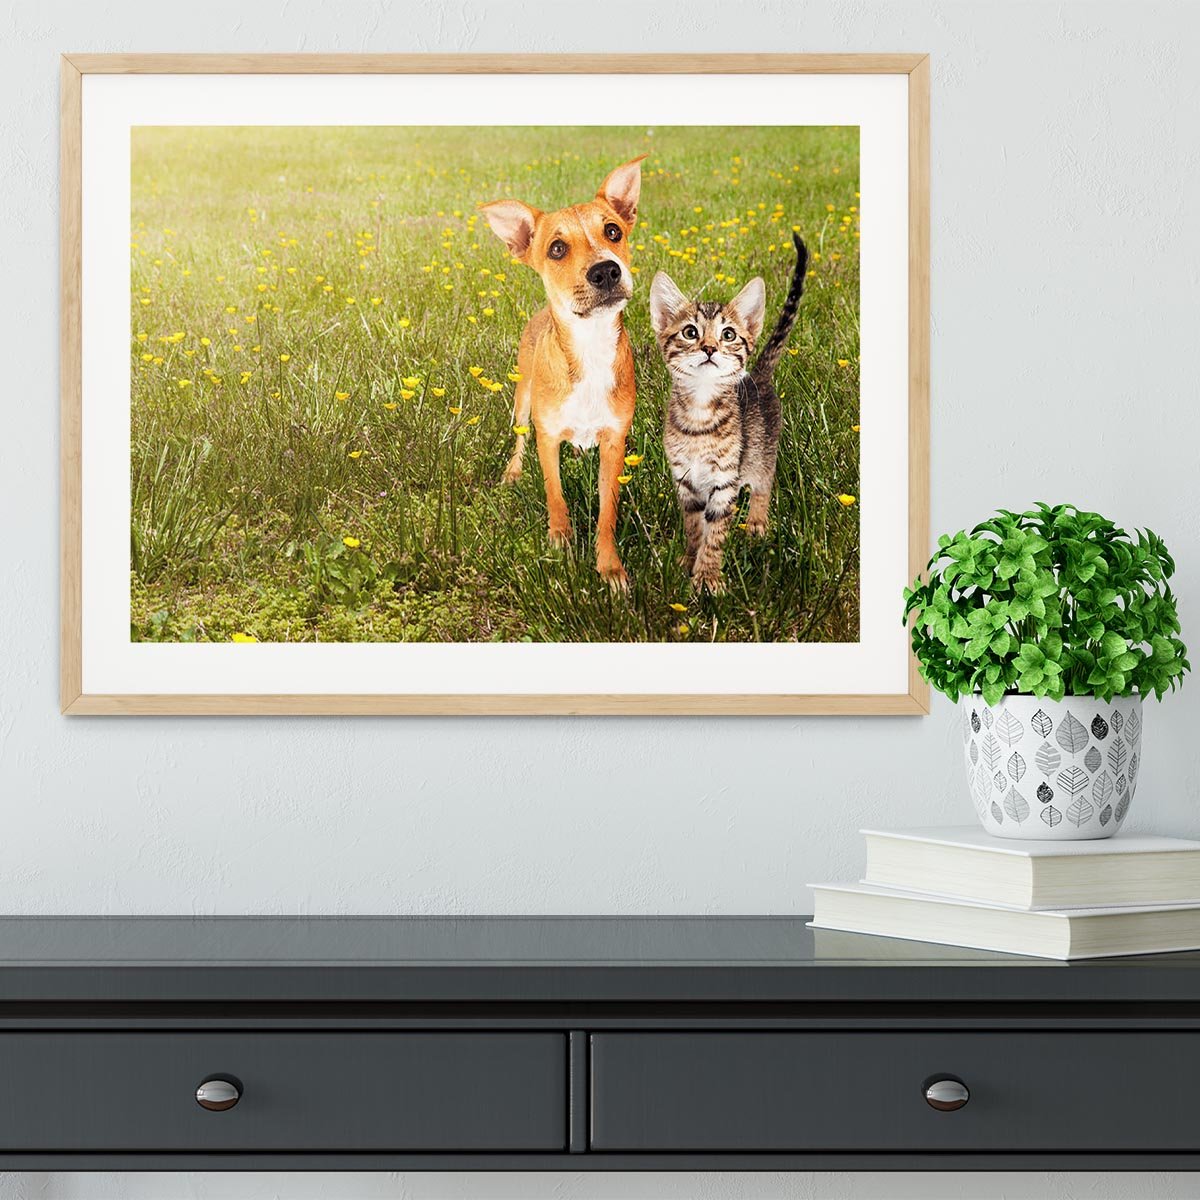 Cute kitten and puppy together in a field Framed Print - Canvas Art Rocks - 3